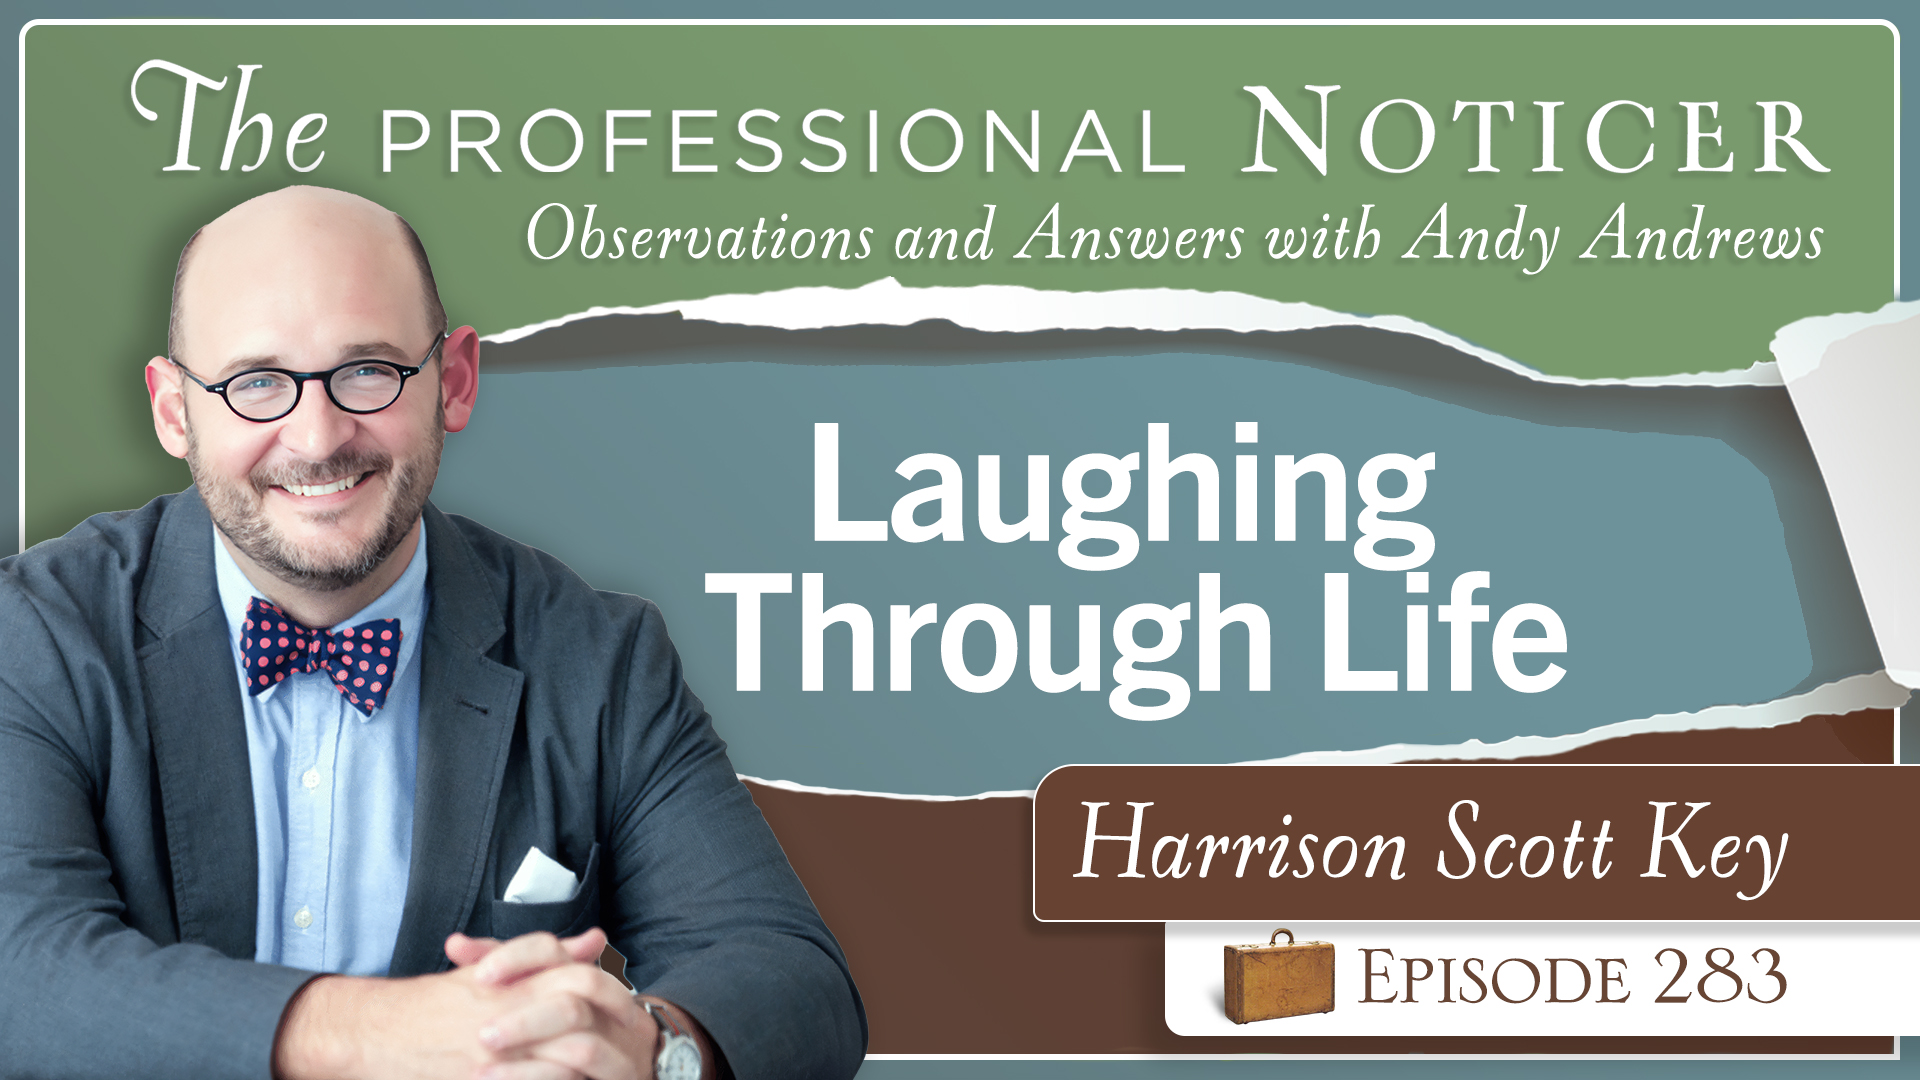 Laughing Through Life: A Conversation with Harrison Scott Key